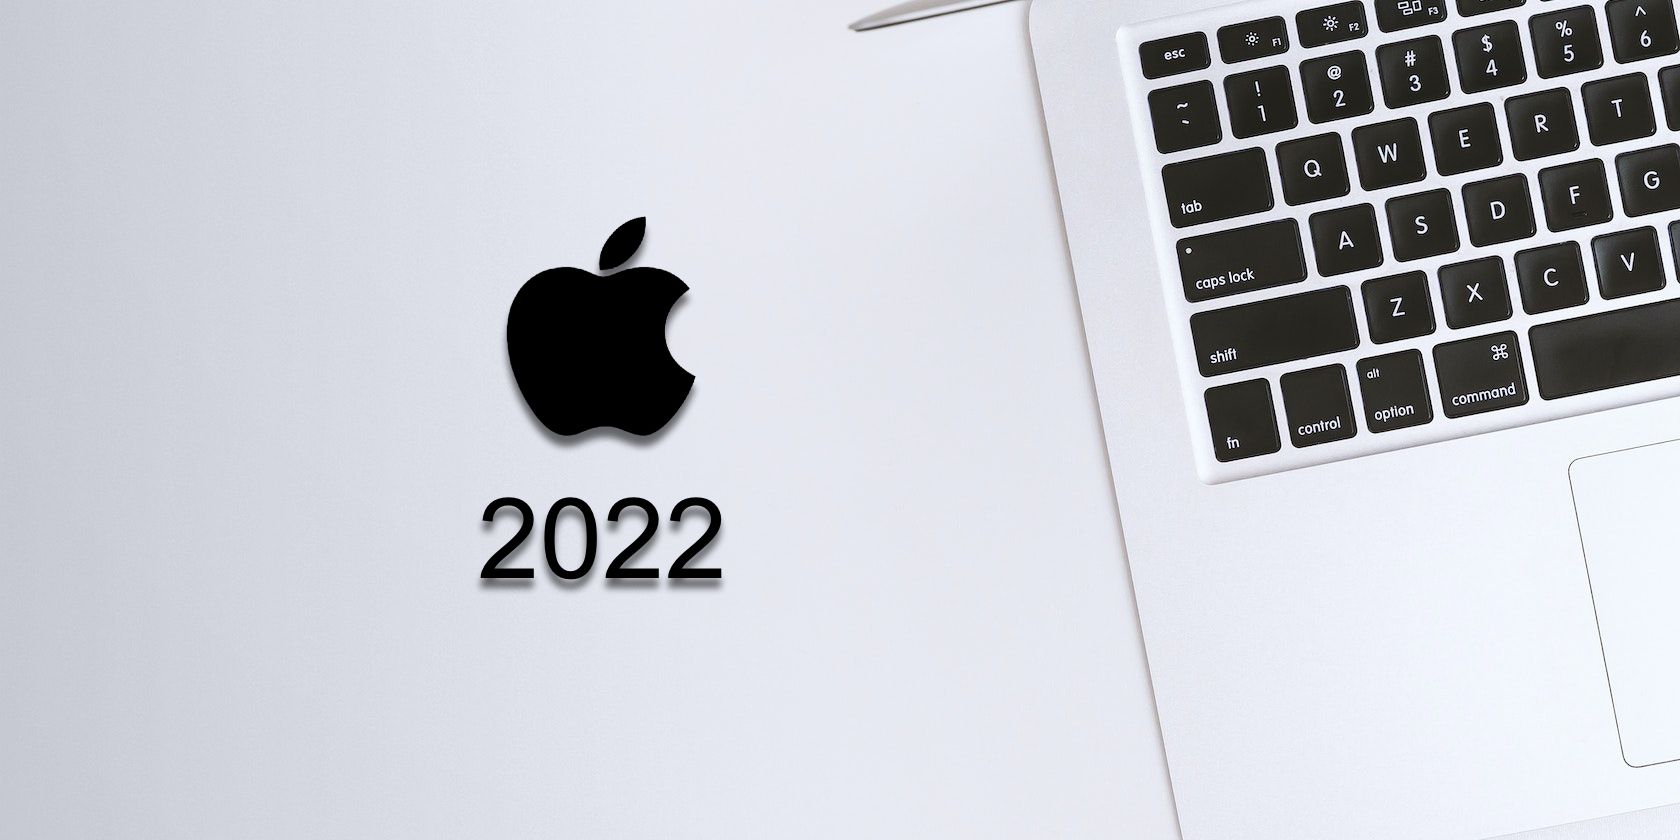 Feature image of MacBook with Apple logo and 2022 underneath